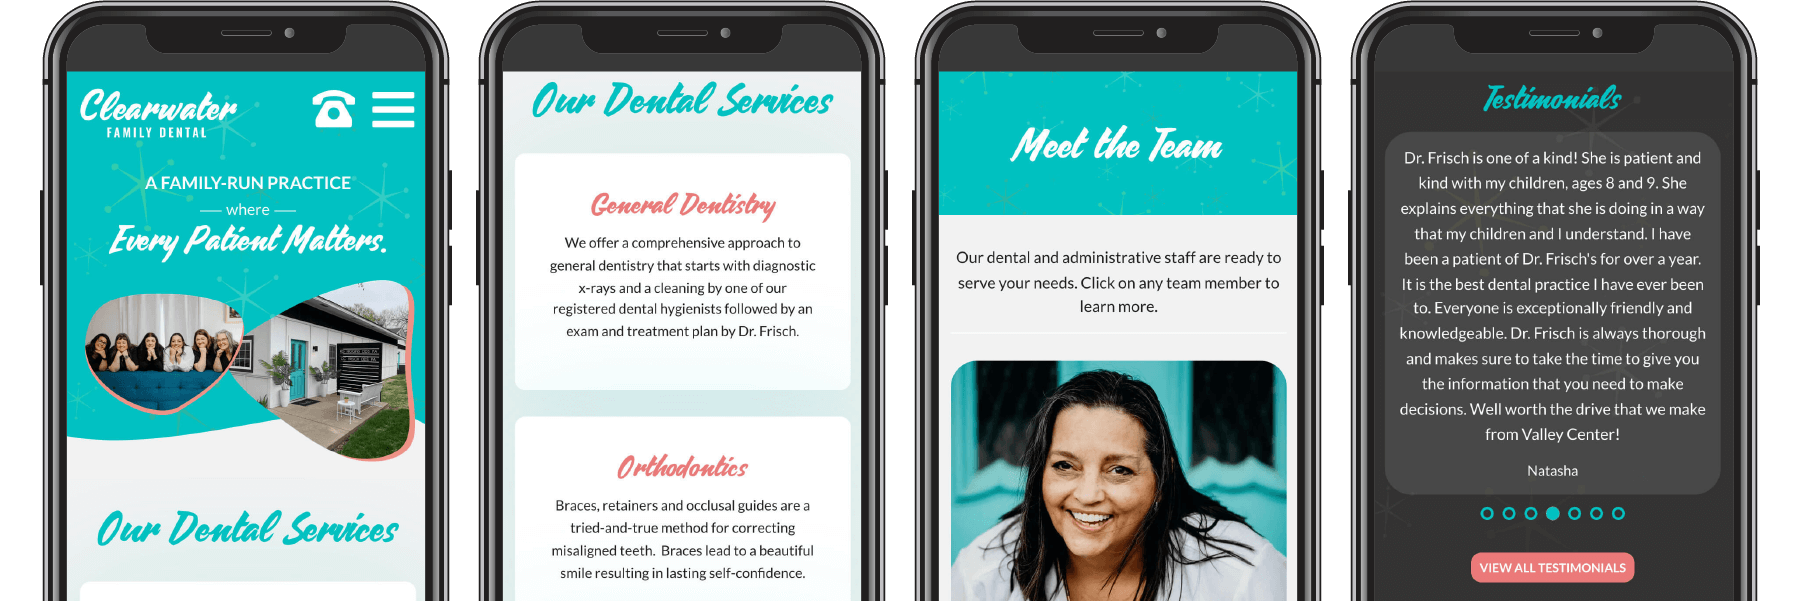 Four pages of the Clearwater Family Dental website displayed on four phones.